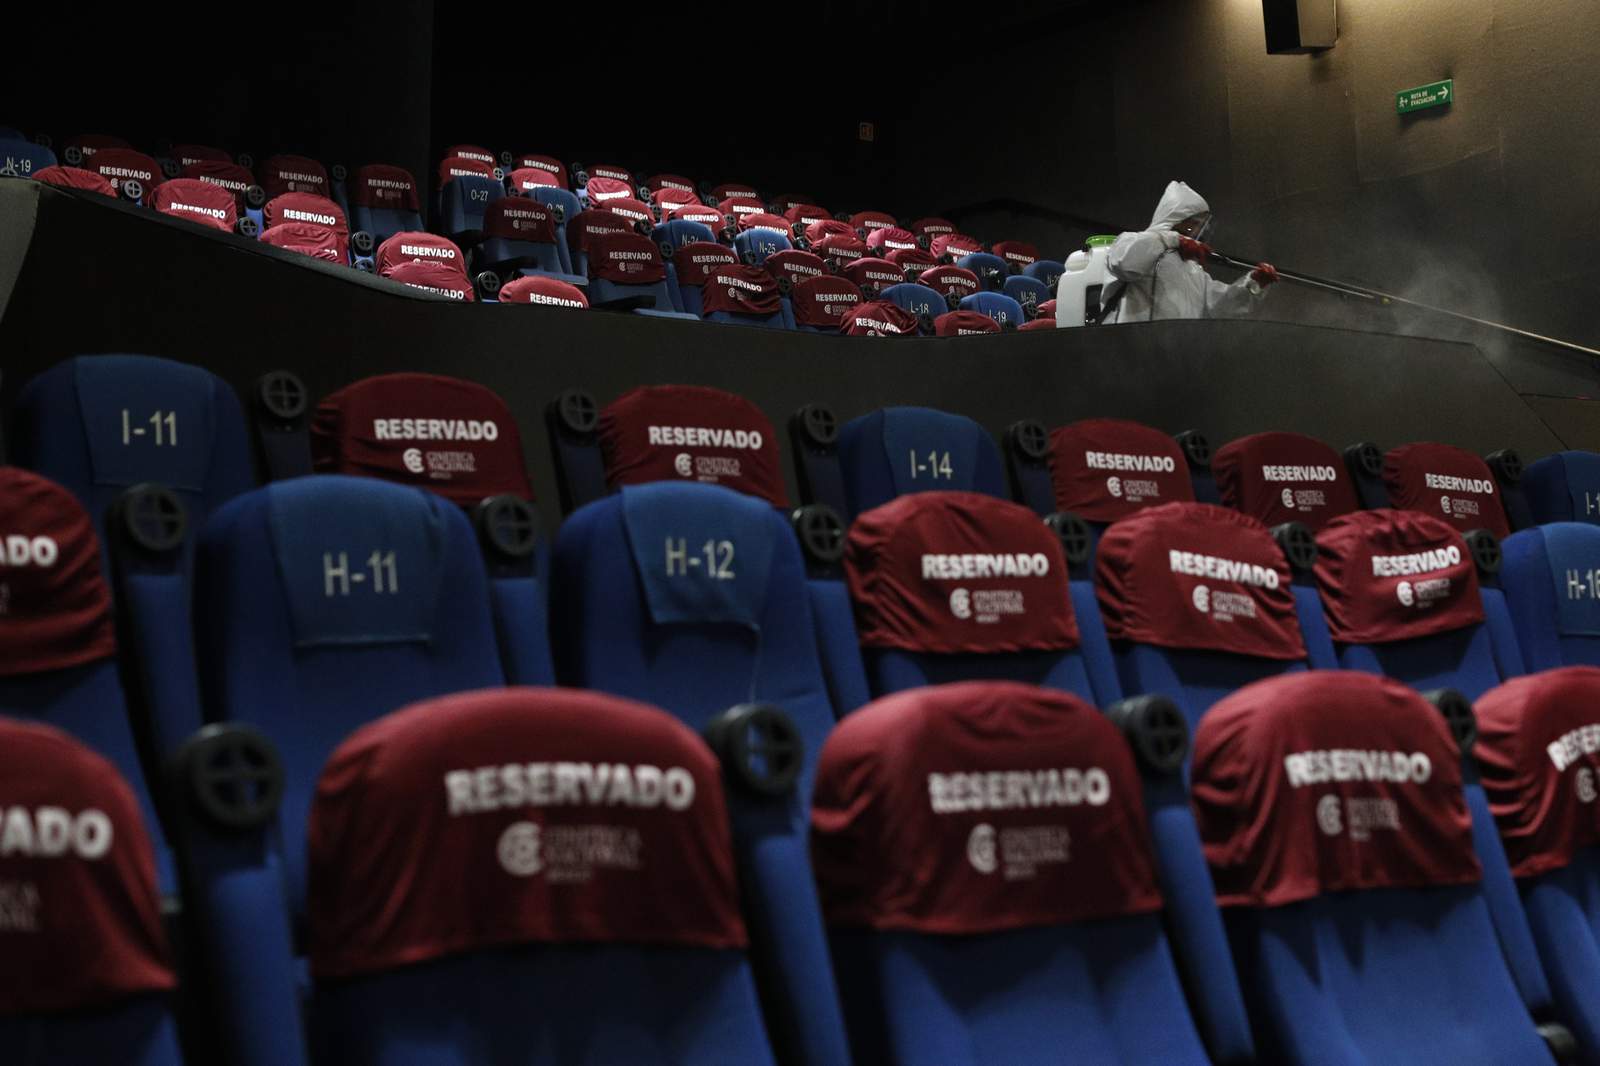 Mexico City reopens movie theaters to sparse crowds